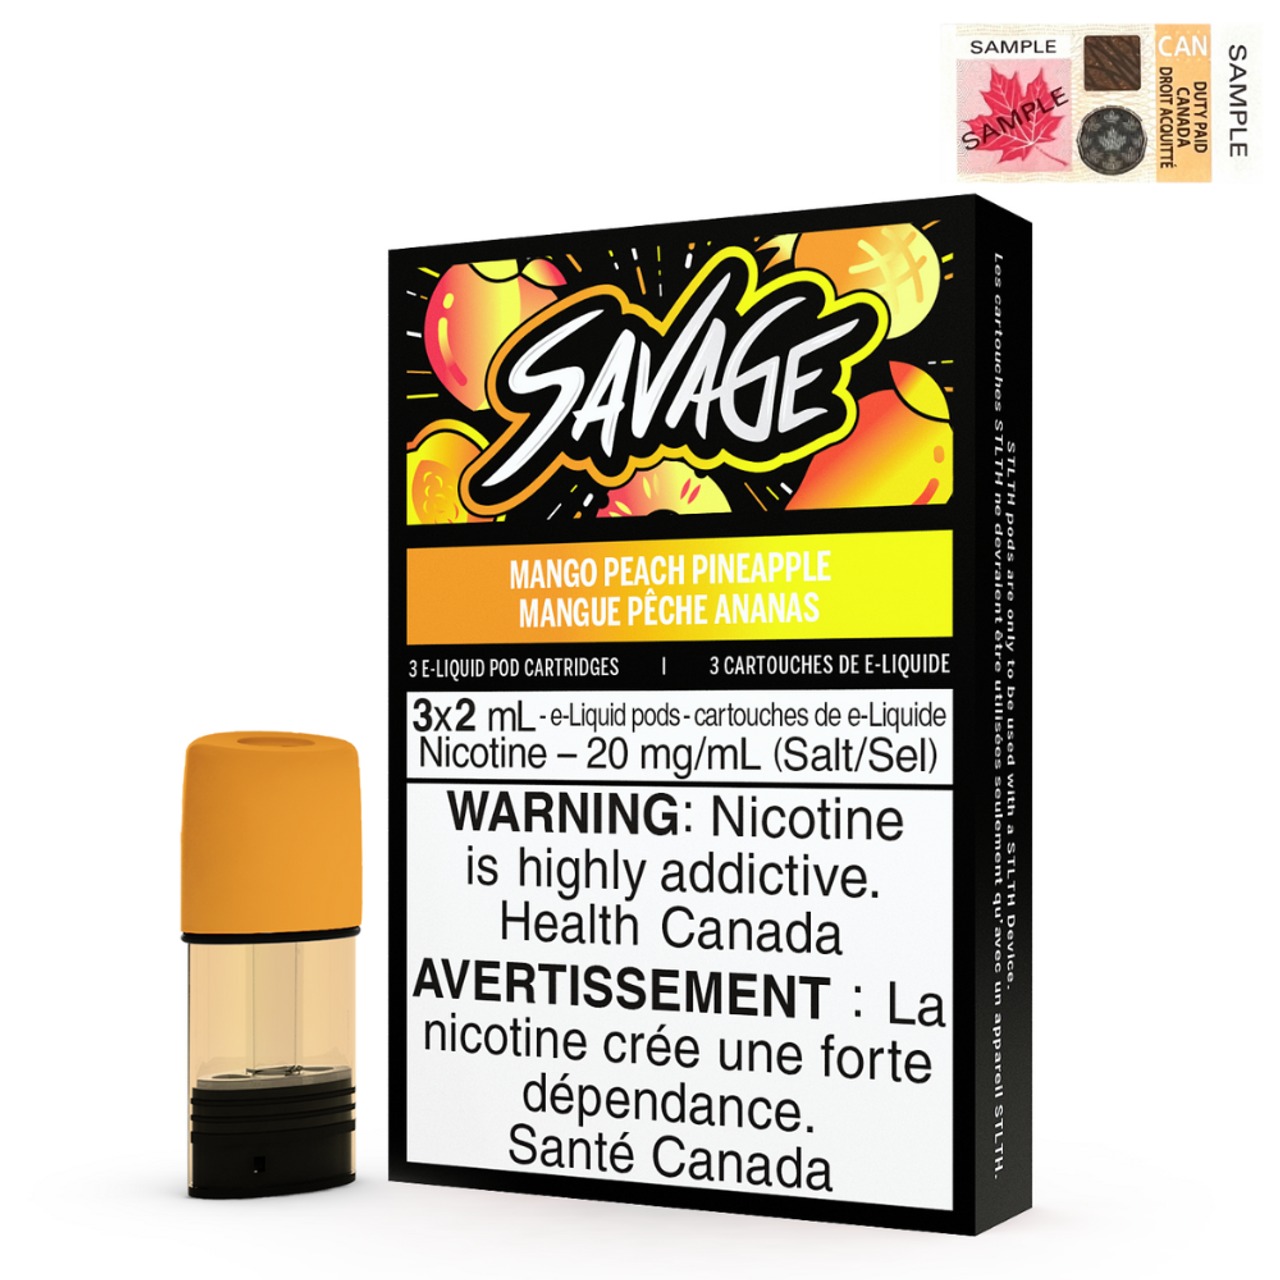 Mango Peach Pineapple (Stamped) STLTH Savage Pods Pack of 3 - B.C. Compliance